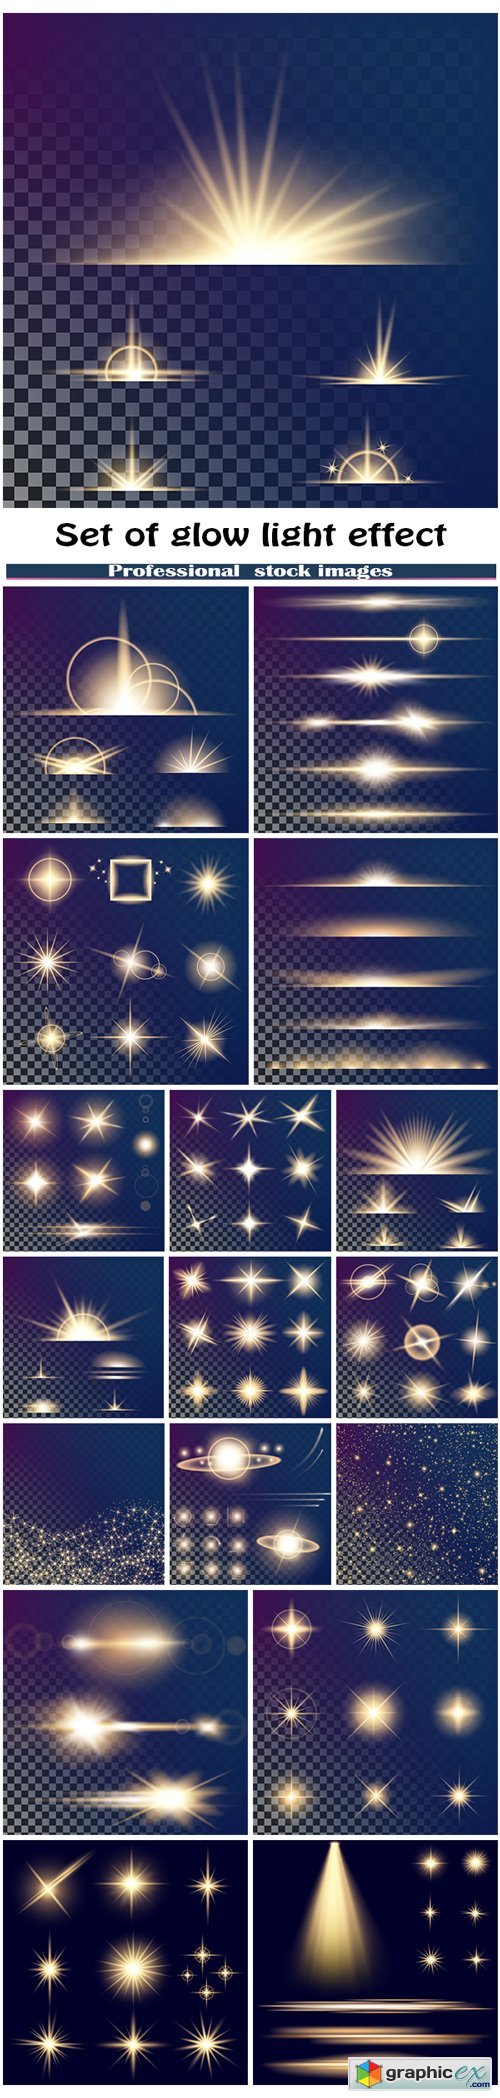 Set of glow light effect stars bursts with sparkles